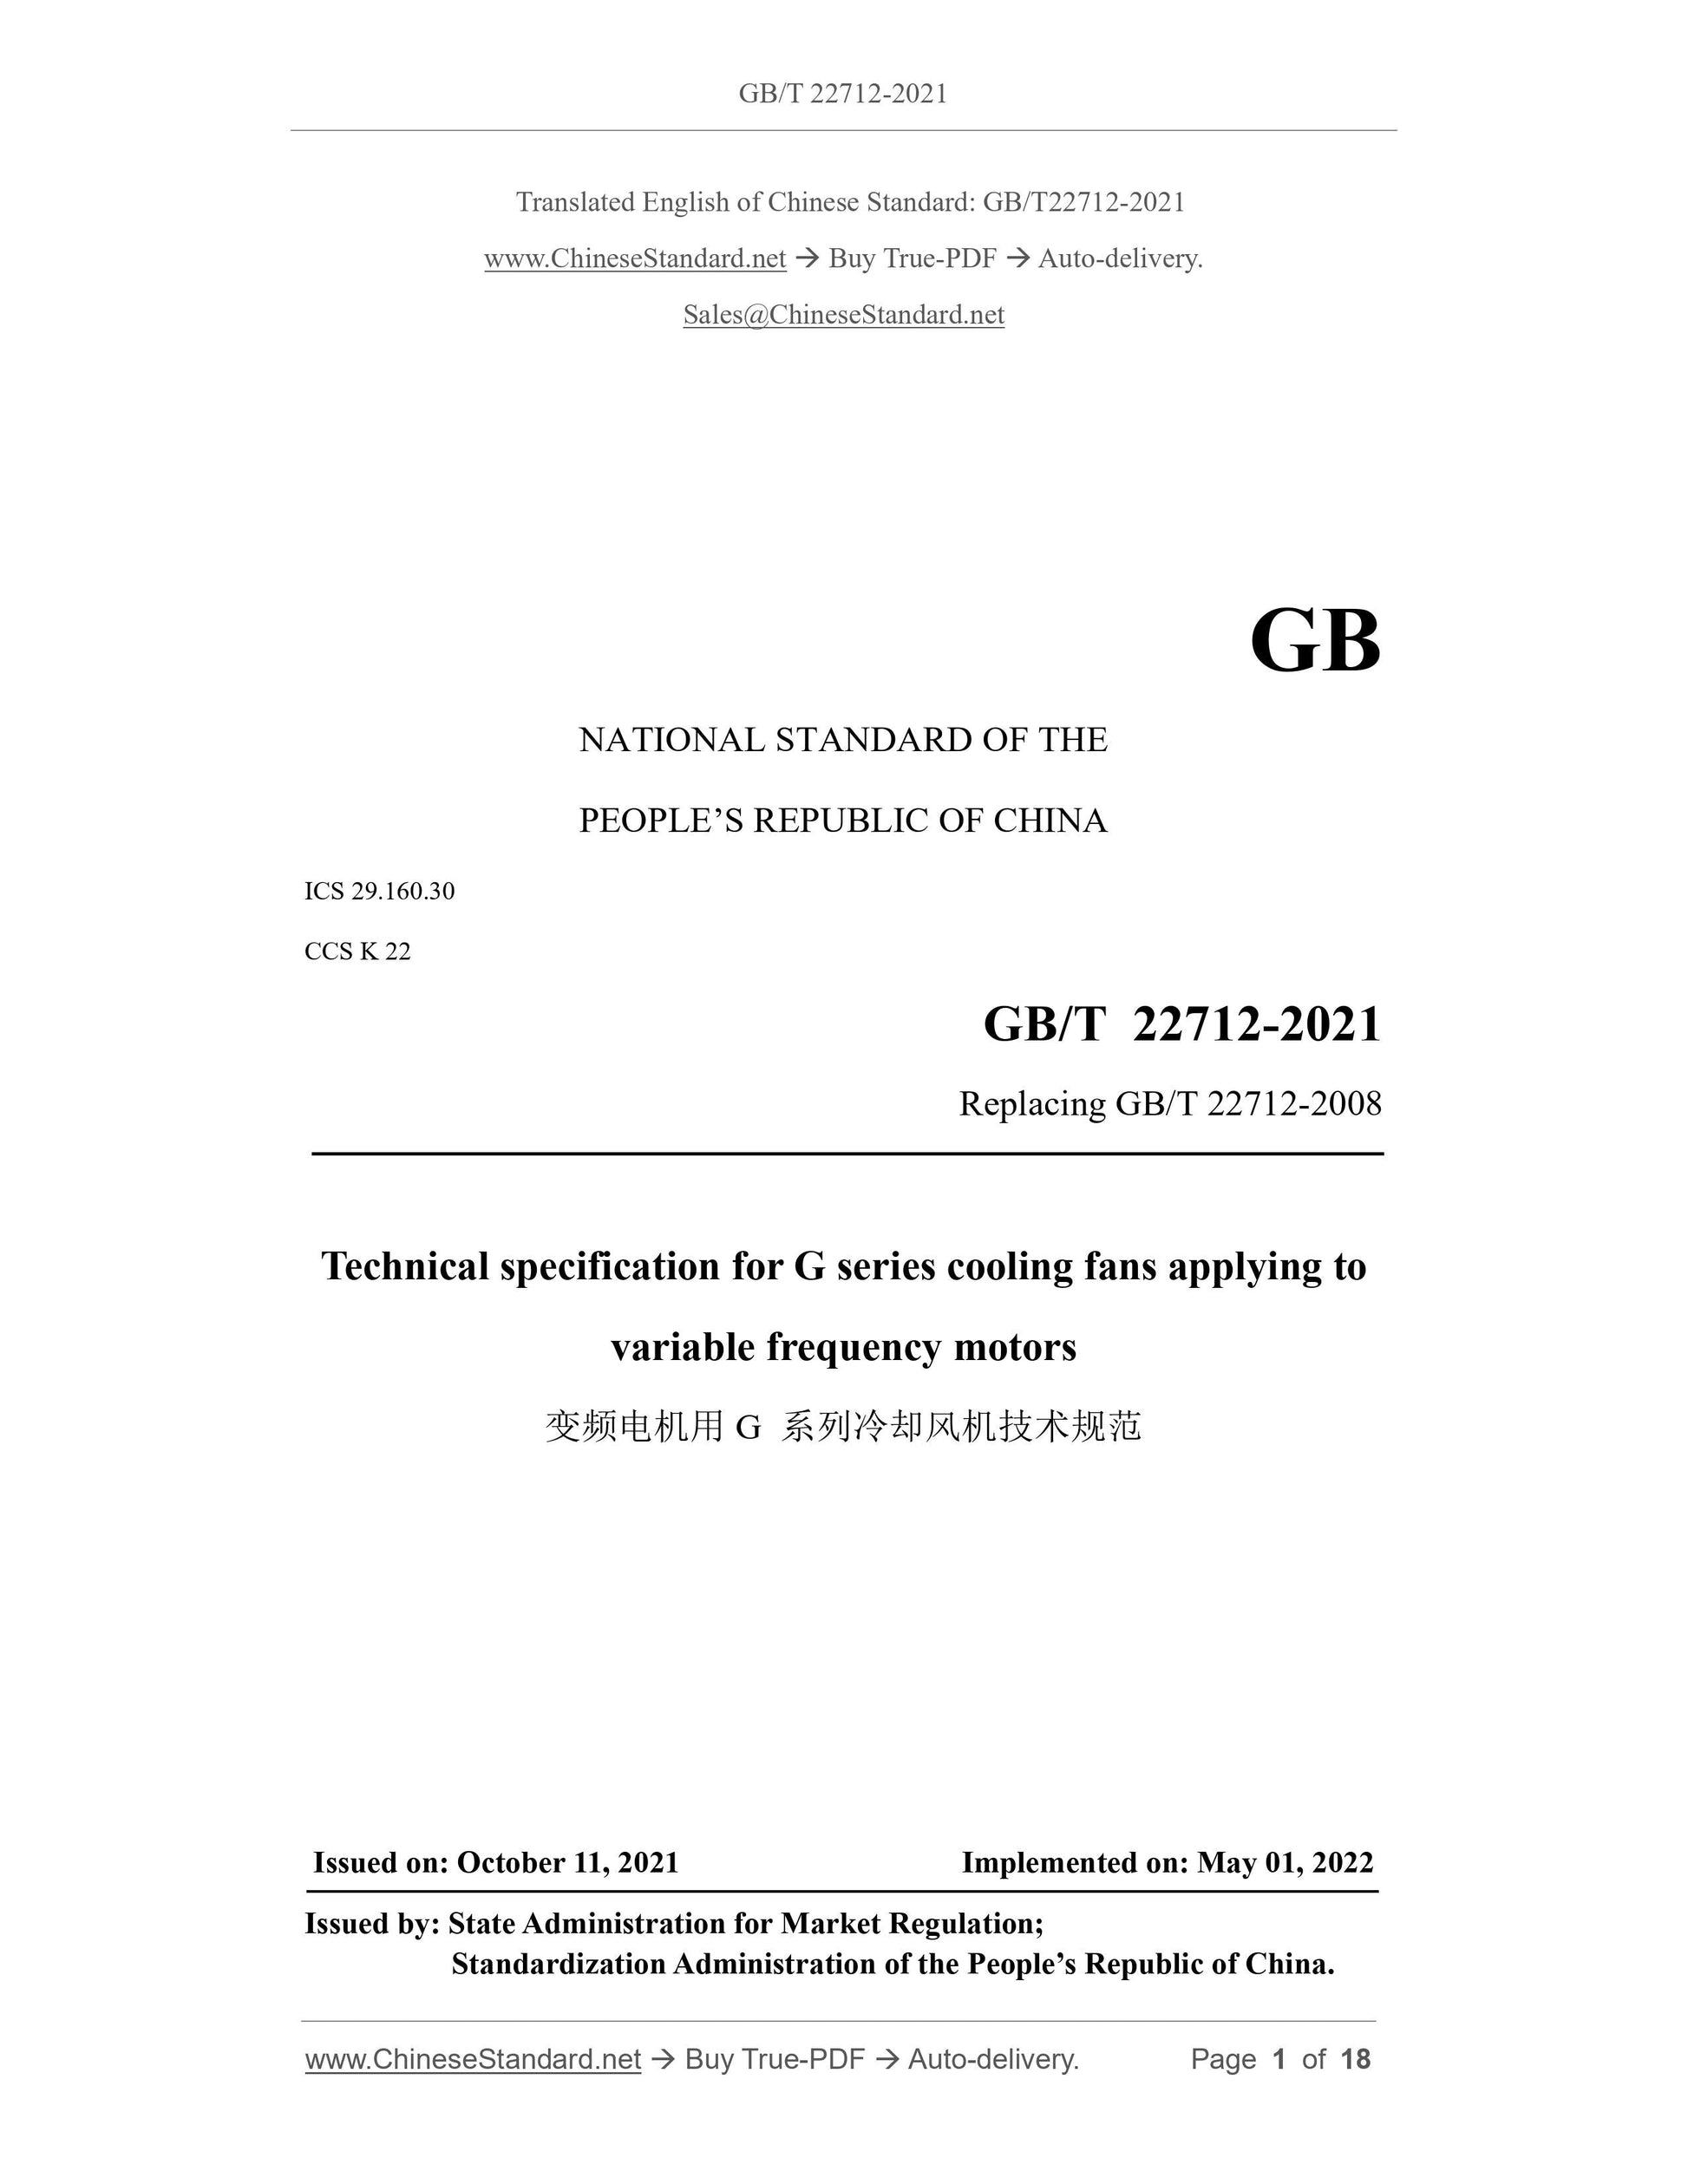 GB/T 22712-2021 Page 1